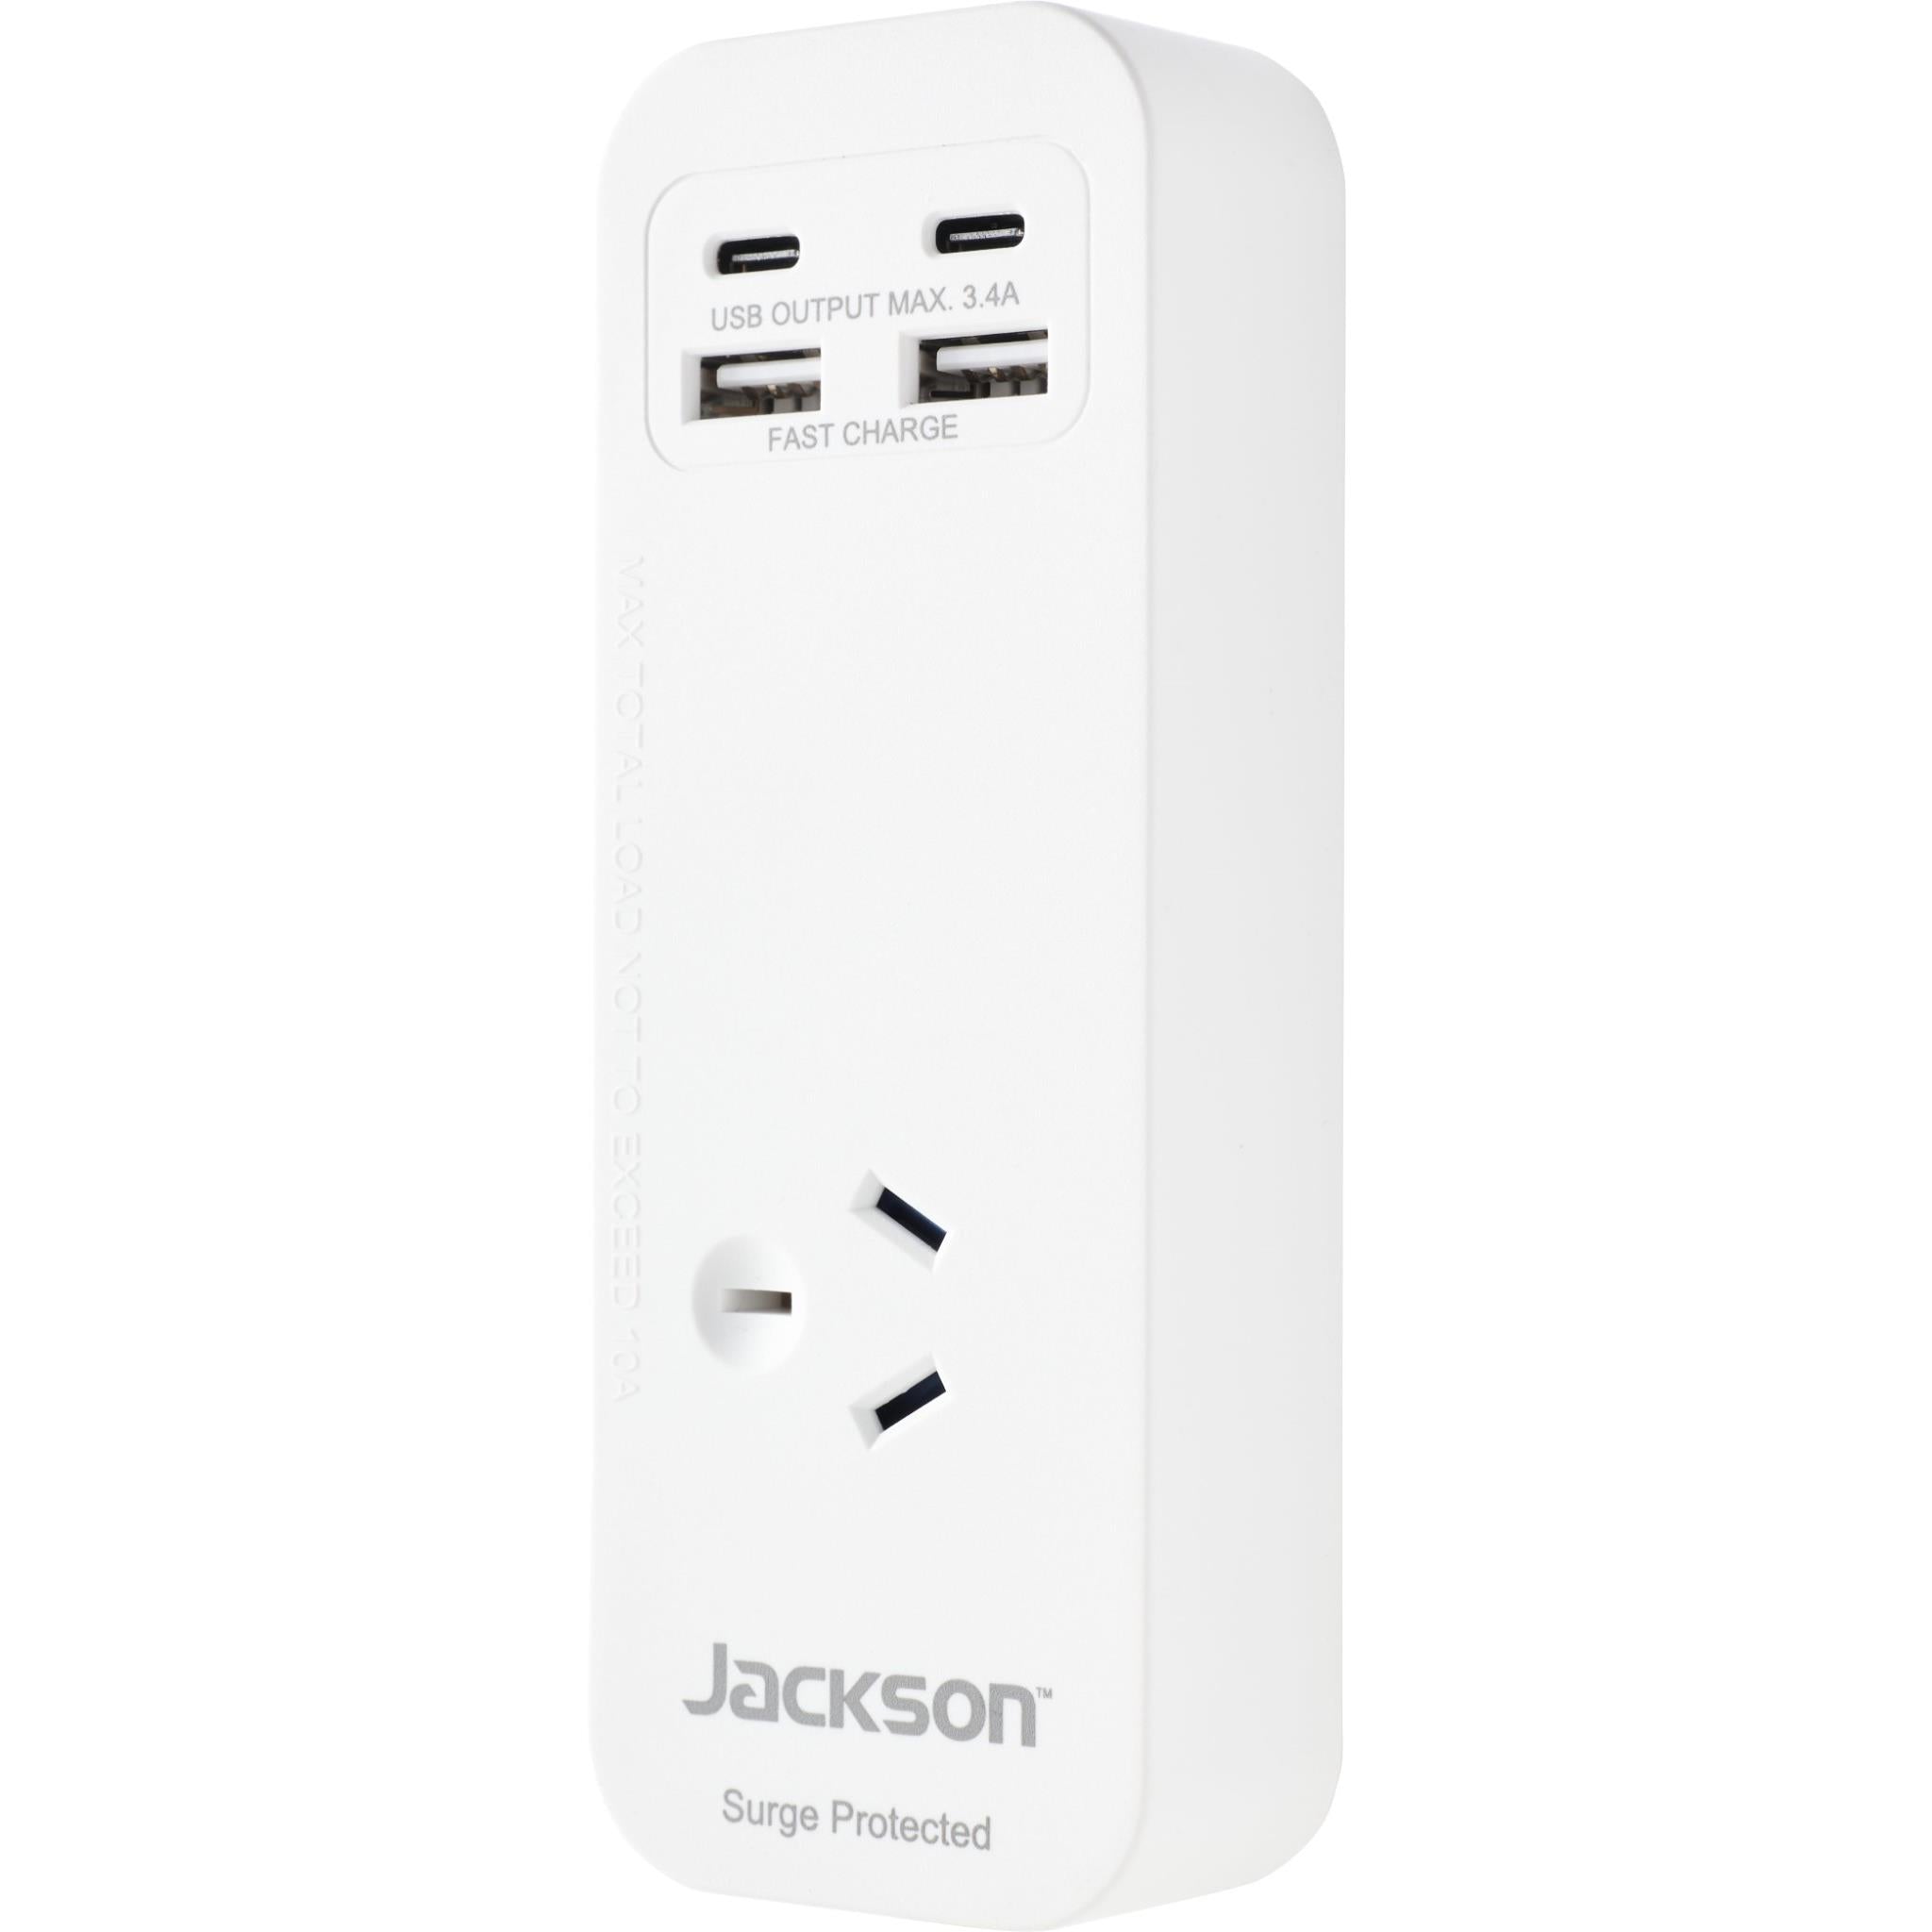 jackson fast charge usb-c/a 1 portable powerboard (white)